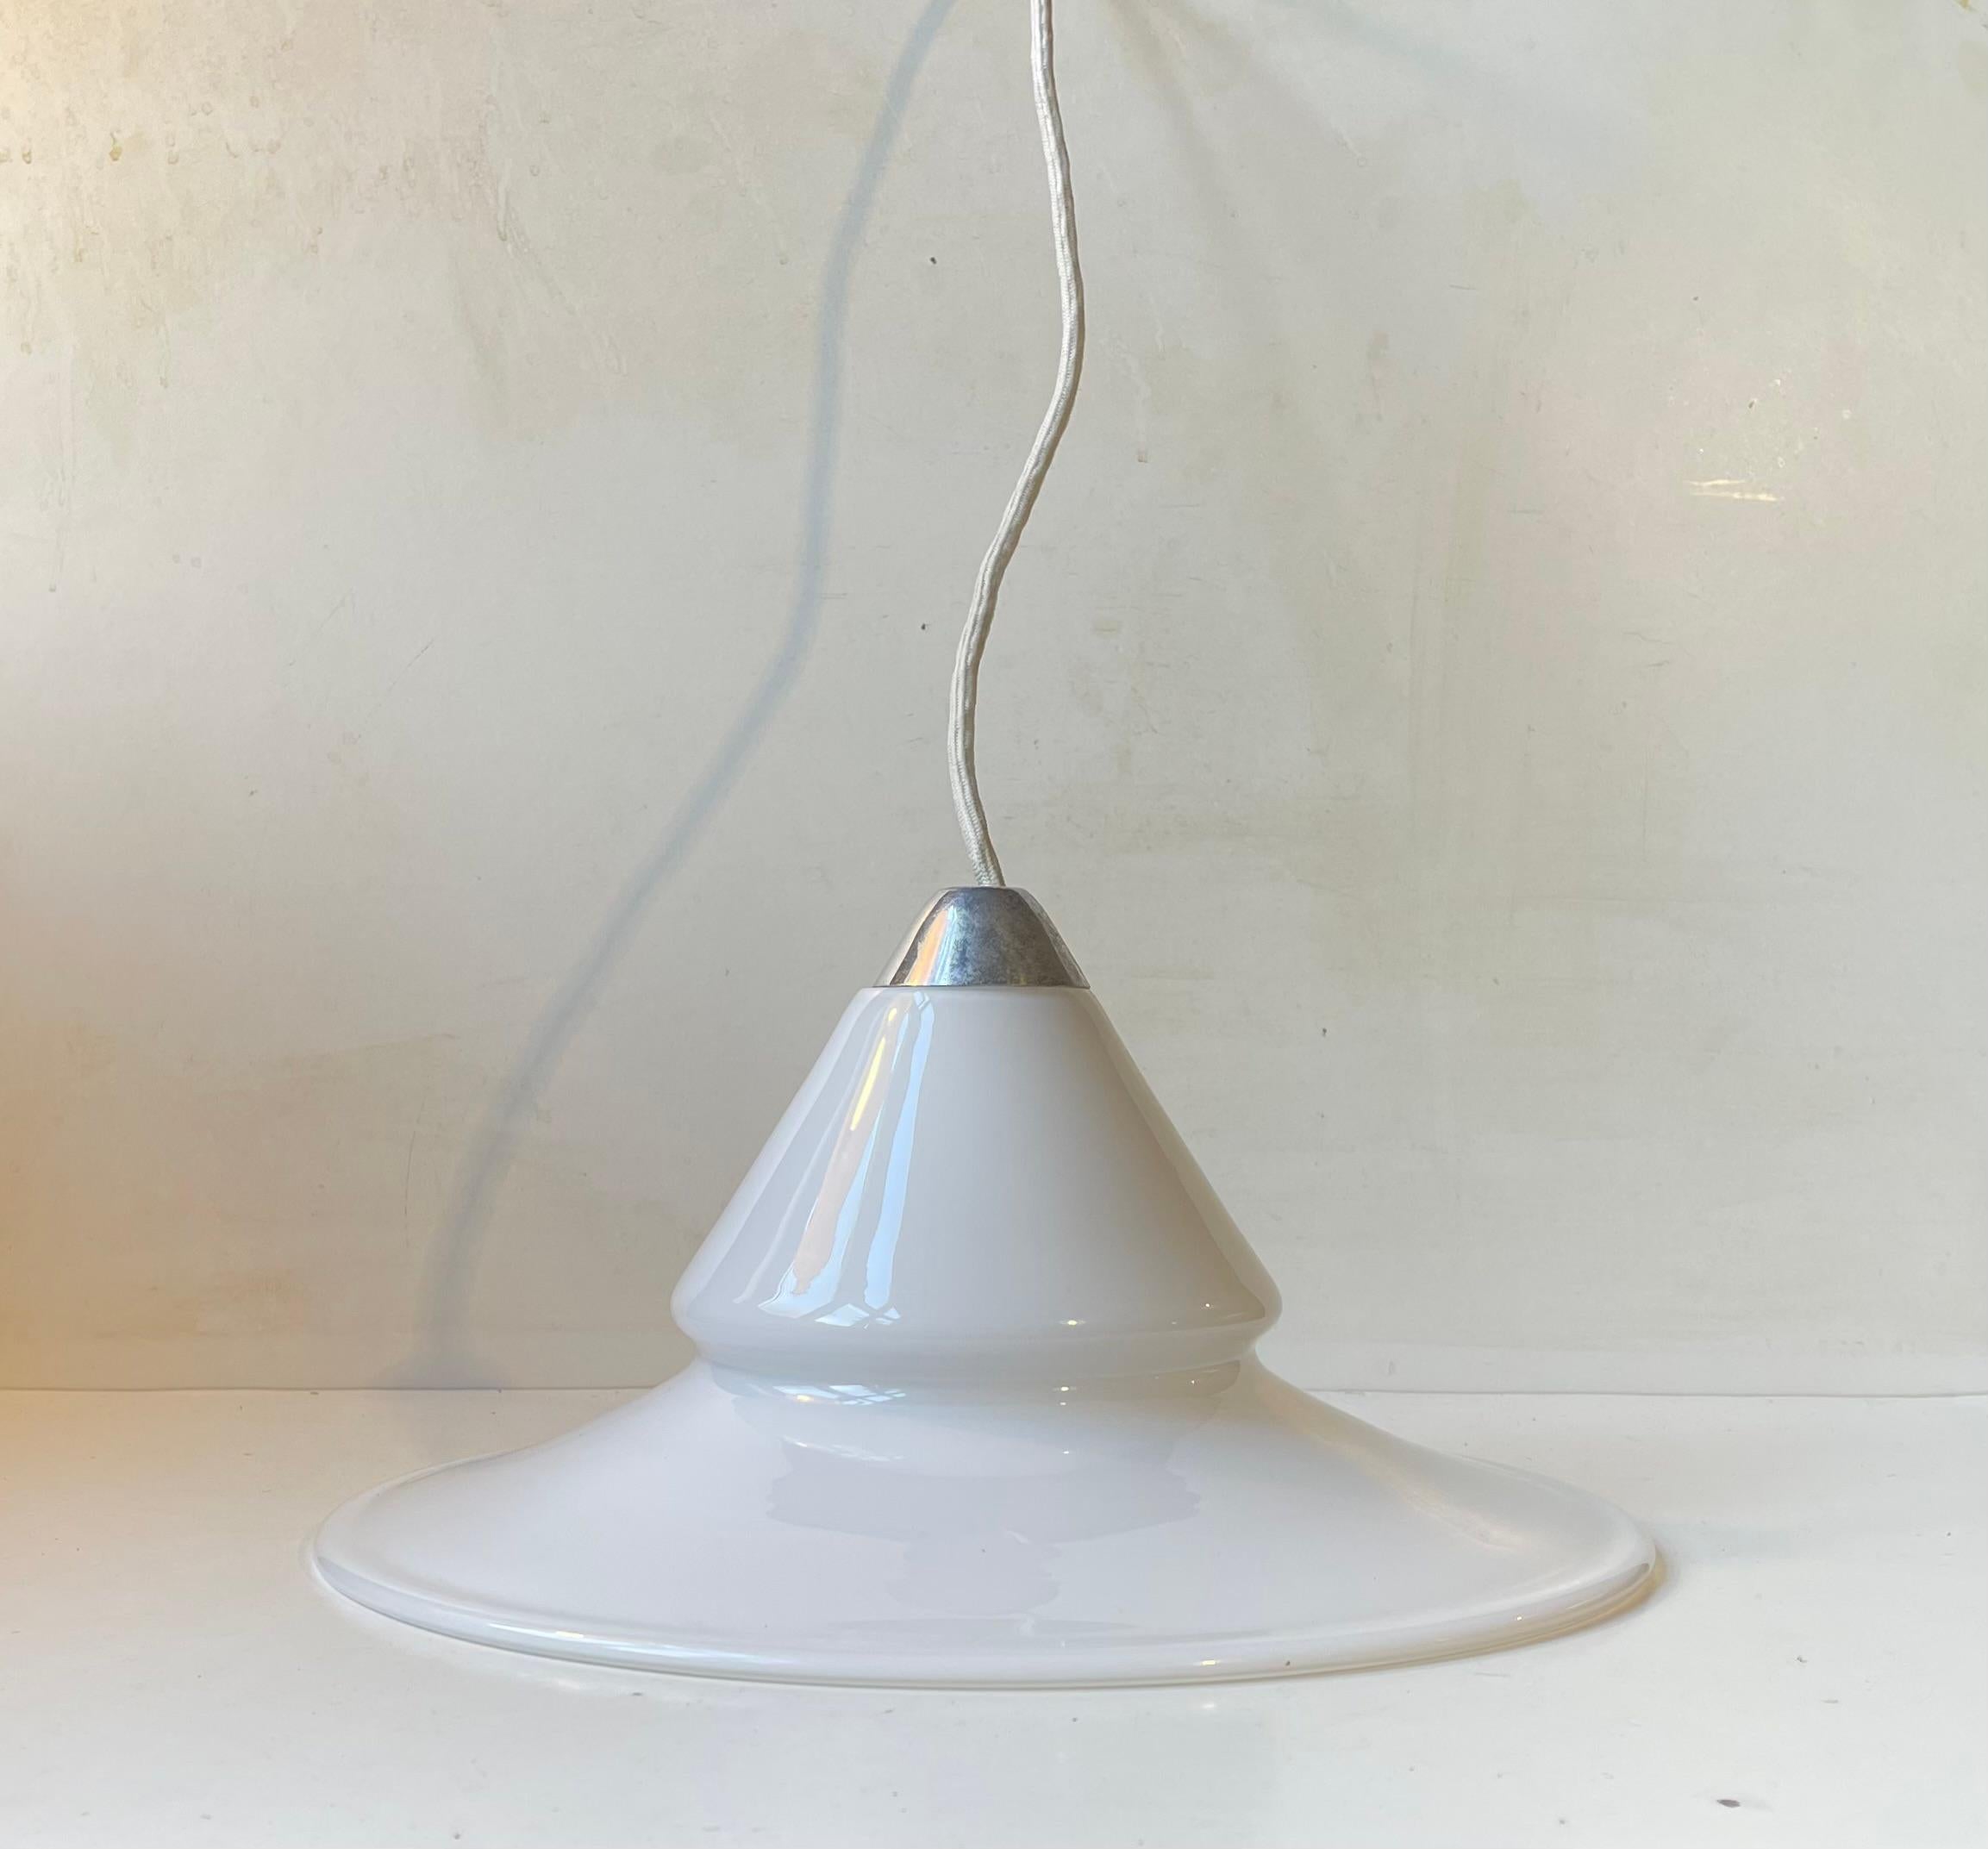 A rare hanging lamp called Opus. It was designed by Torben Jørgensen and manufactured by Royal copenhagen in Denmark during the 1980s. The glass shade was commissioned from Holmegaard and is handblown. This light comes installed with 3 meters new